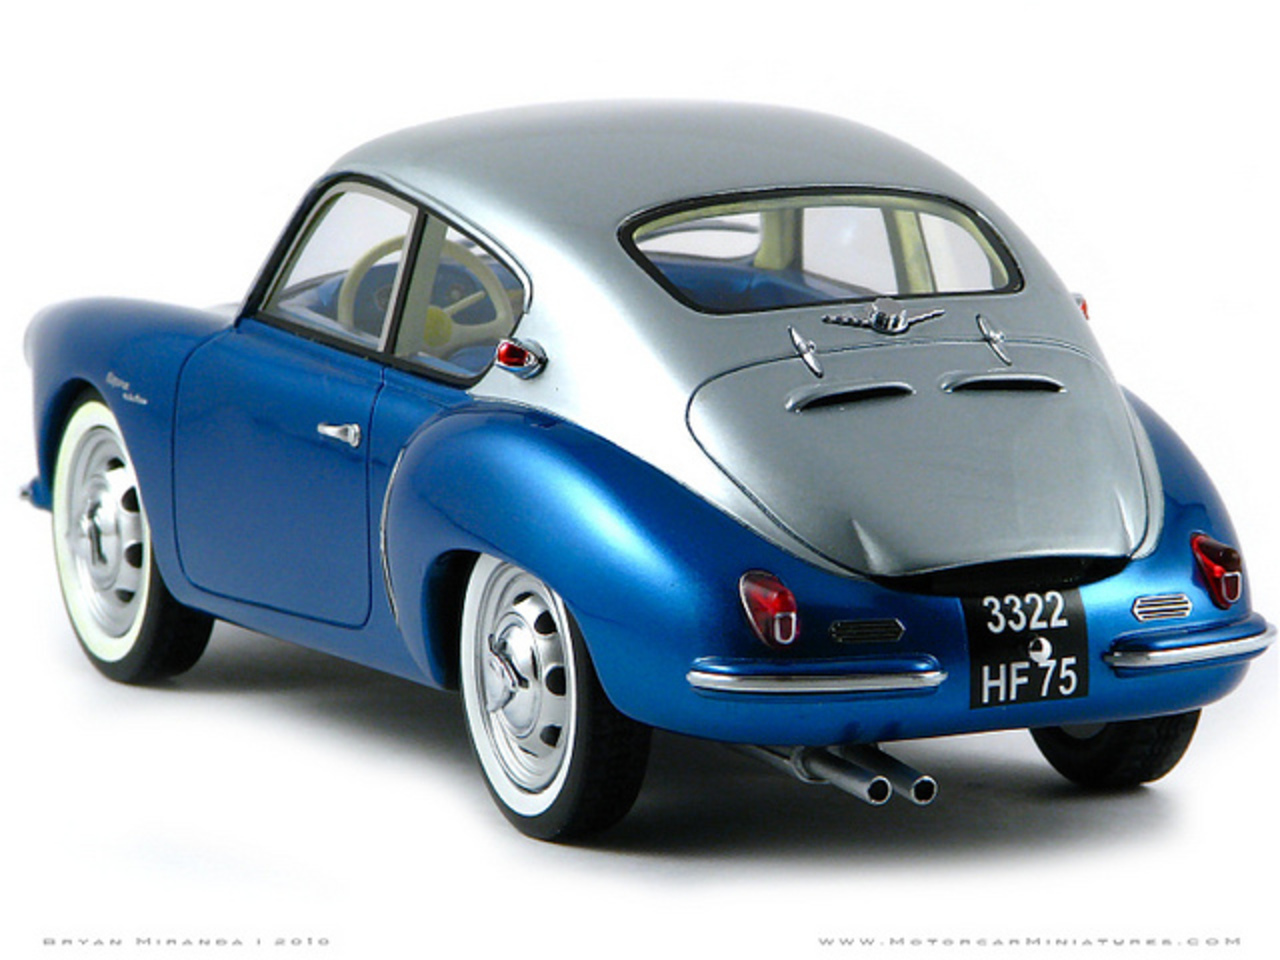 Alpine 1958 A106 Mille Miles - Blue and Gray | Flickr - Photo Sharing!